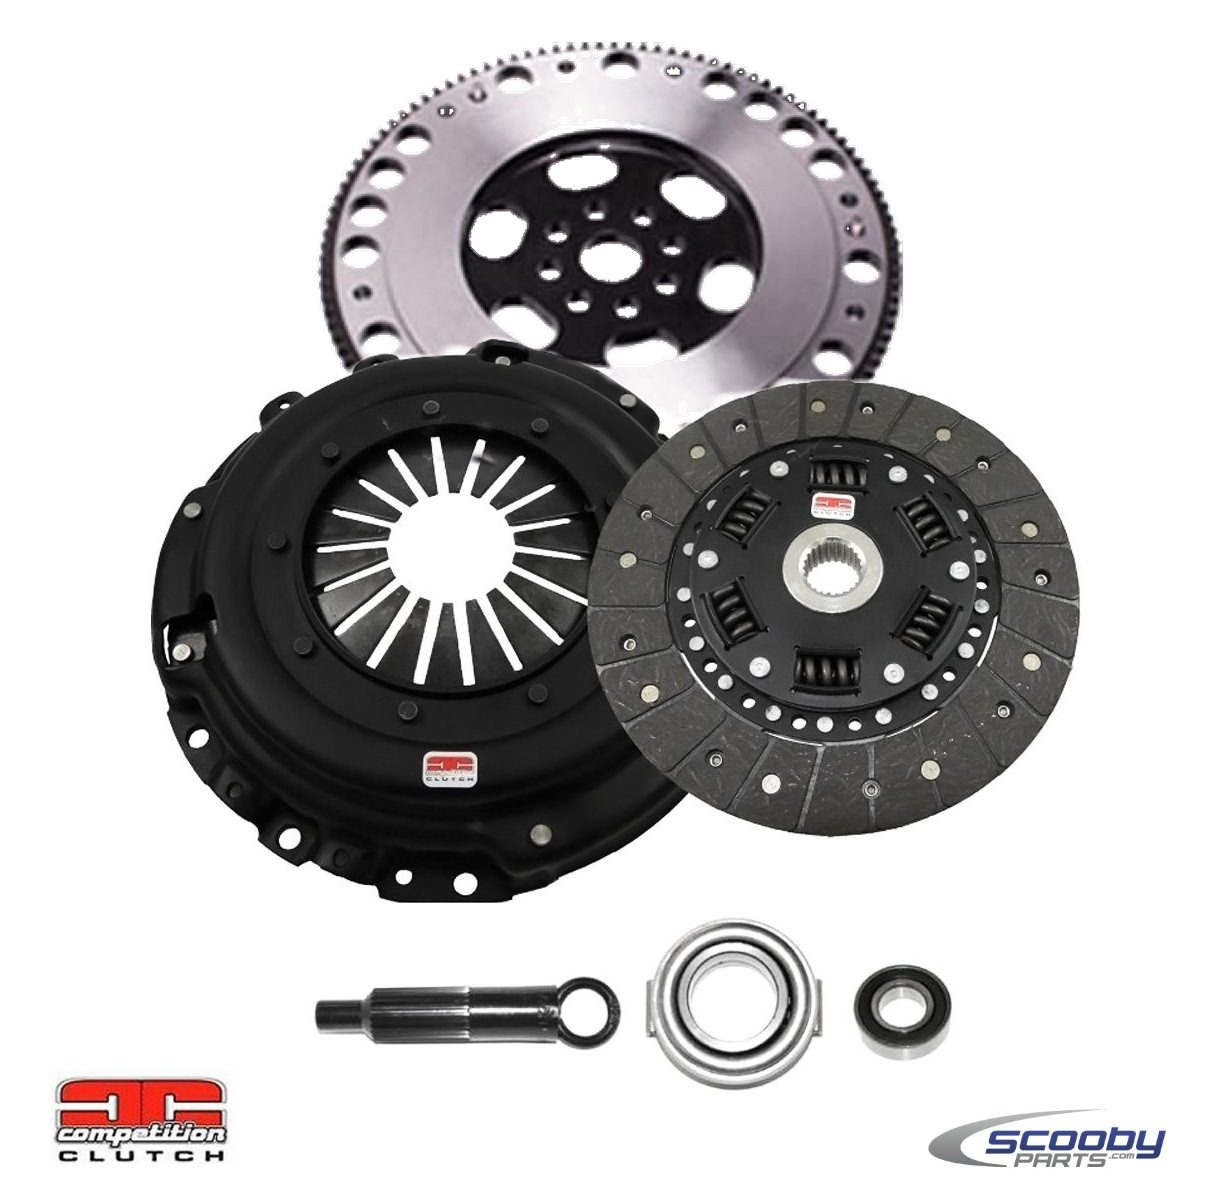 Competition Clutch - Stage 2 Clutch and Lightweight Flywheel Pack Subaru Impreza 1992-2000 & WRX 2001-2005_1